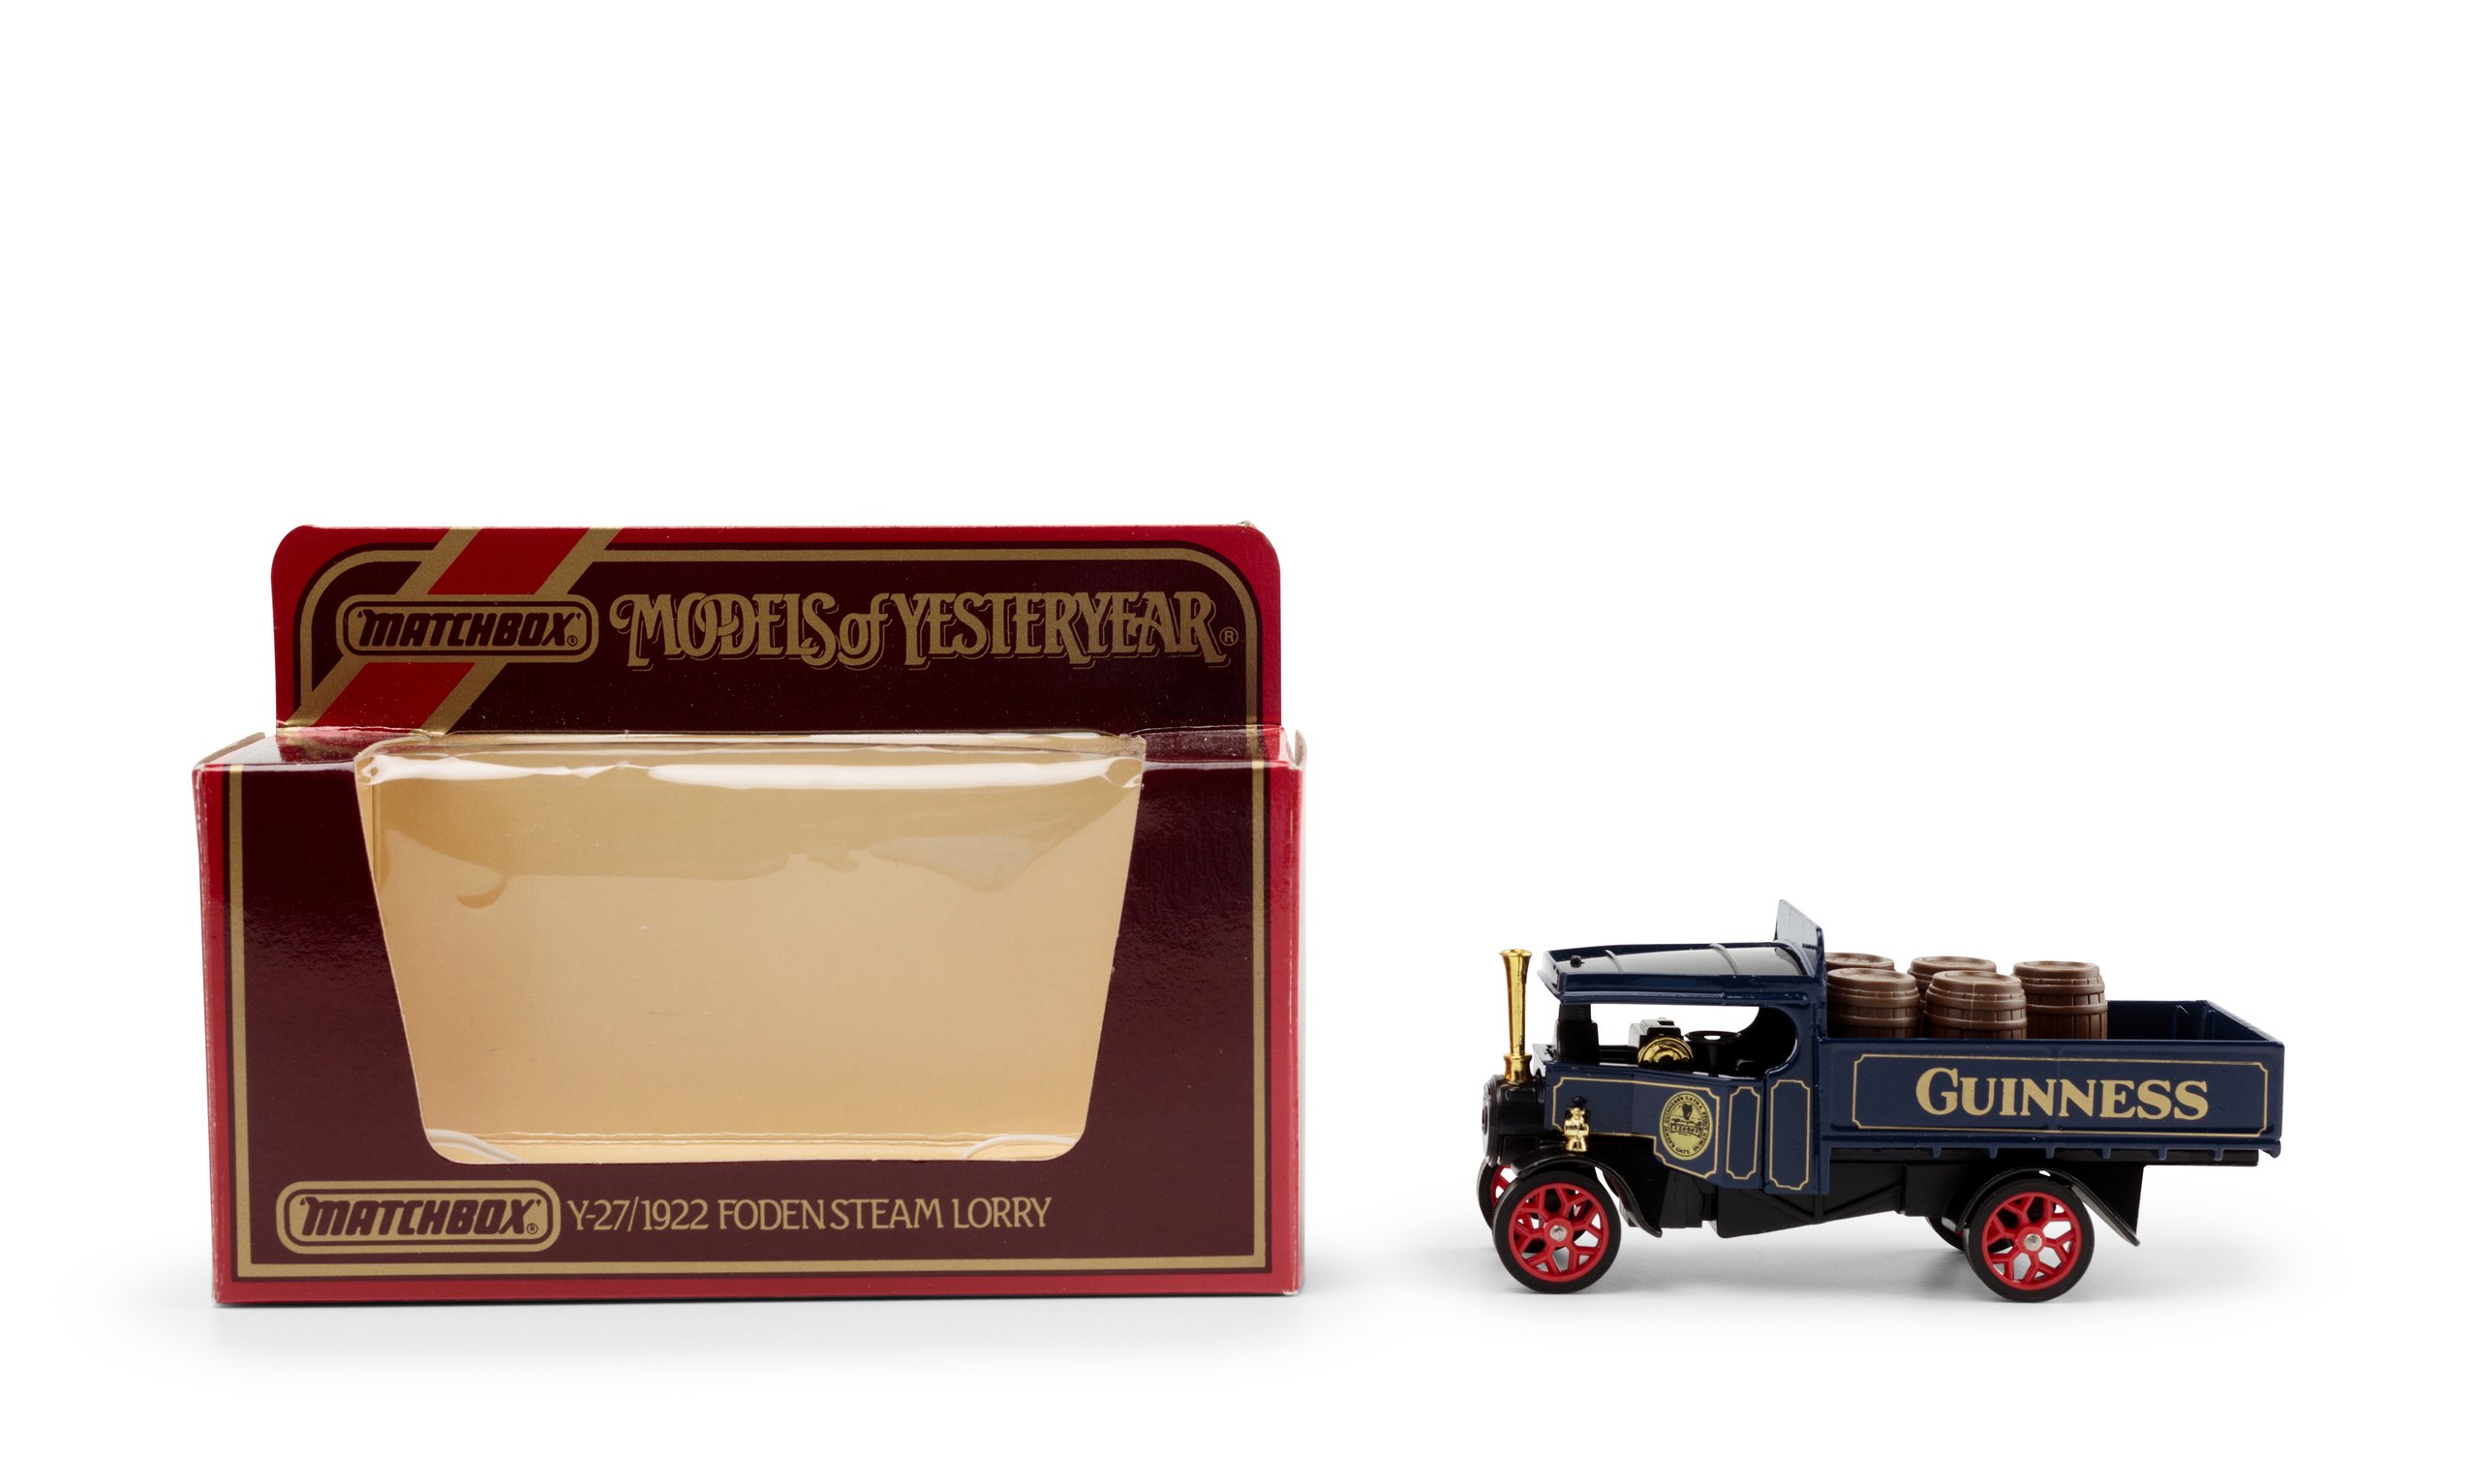 Matchbox toy 1922 Foden Steam lorry and box